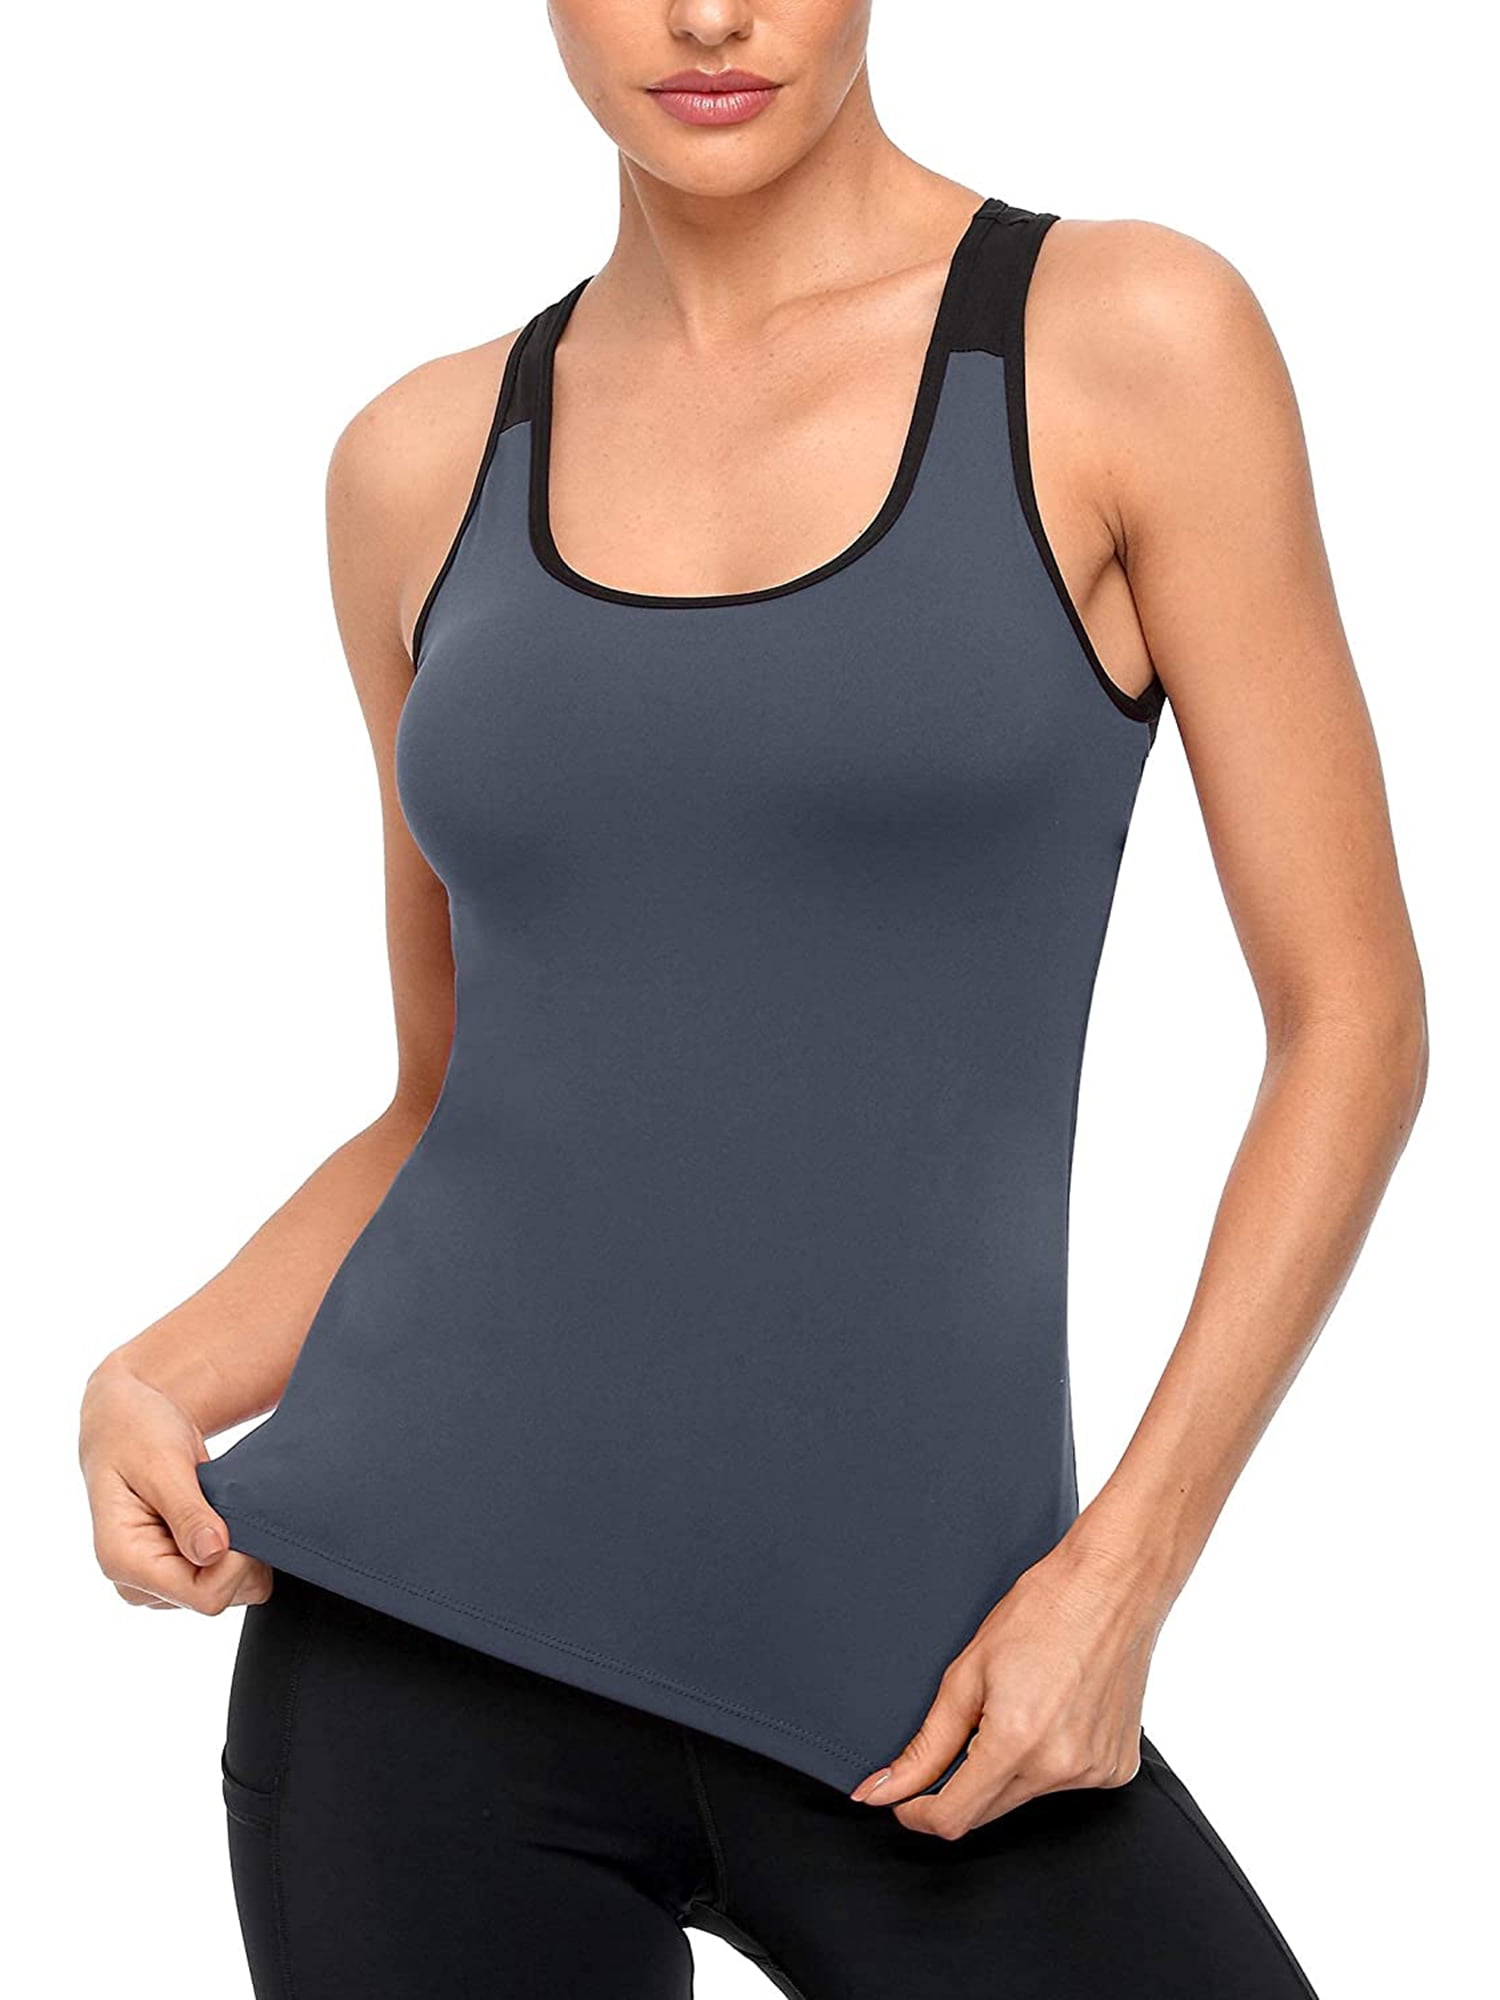 Women's Open Back Workout Tank Top with Built in Bra Athletic